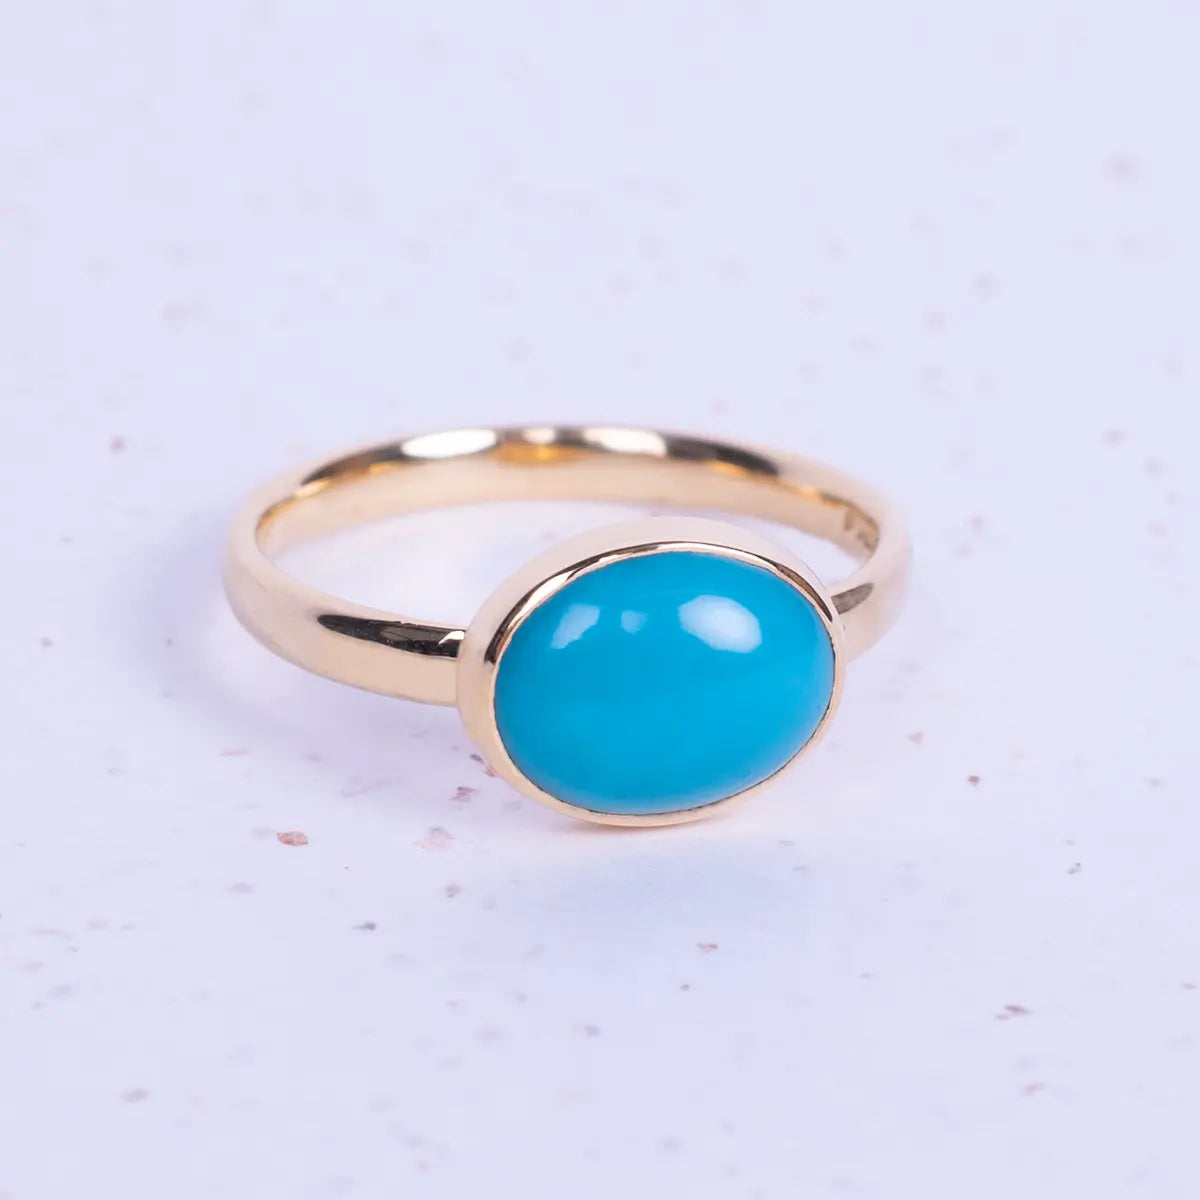 Our replica ring is modelled on Jane Austen’s original gold and turquoise ring, crafted from gold-plated sterling silver and set with a beautiful turquoise stone.